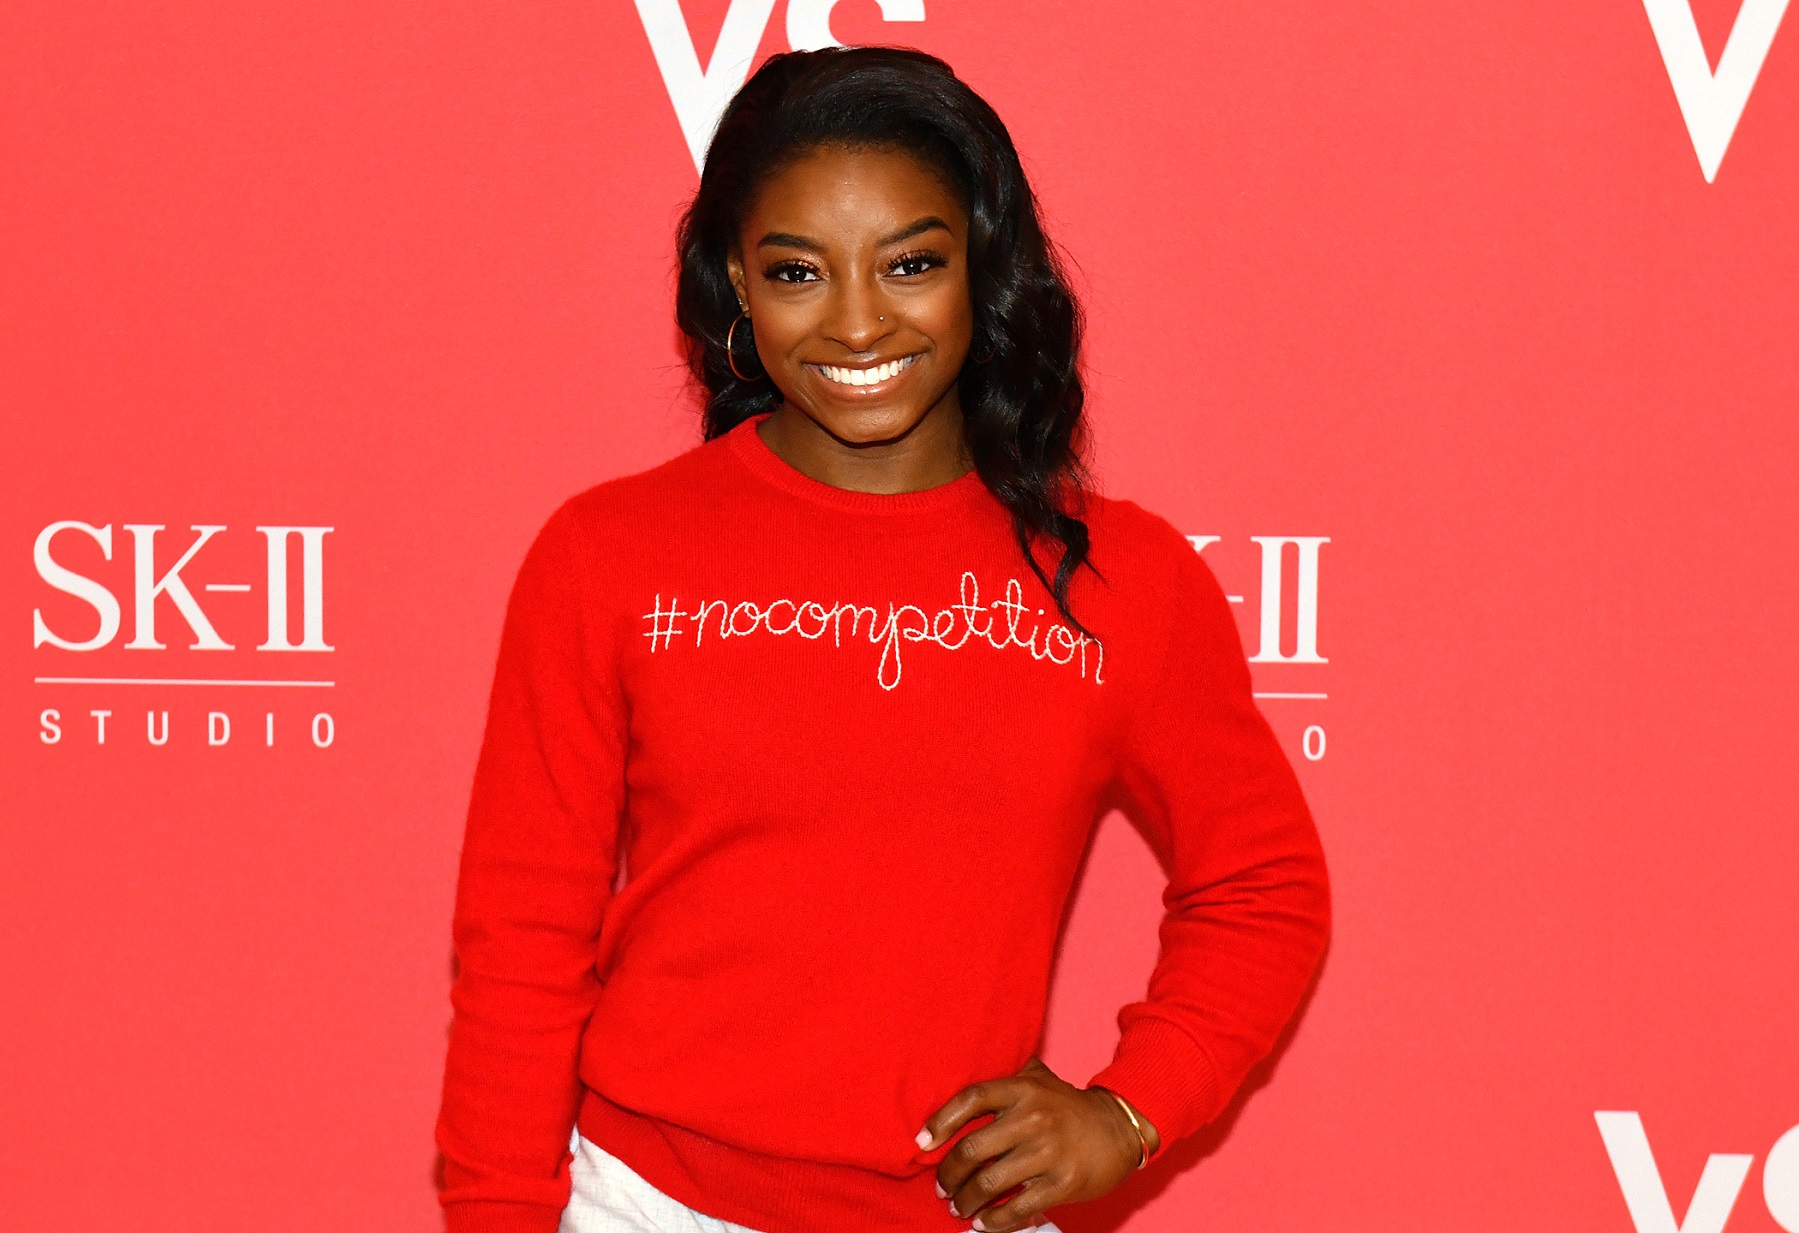 Simone Biles, gold medalist in the Olympics